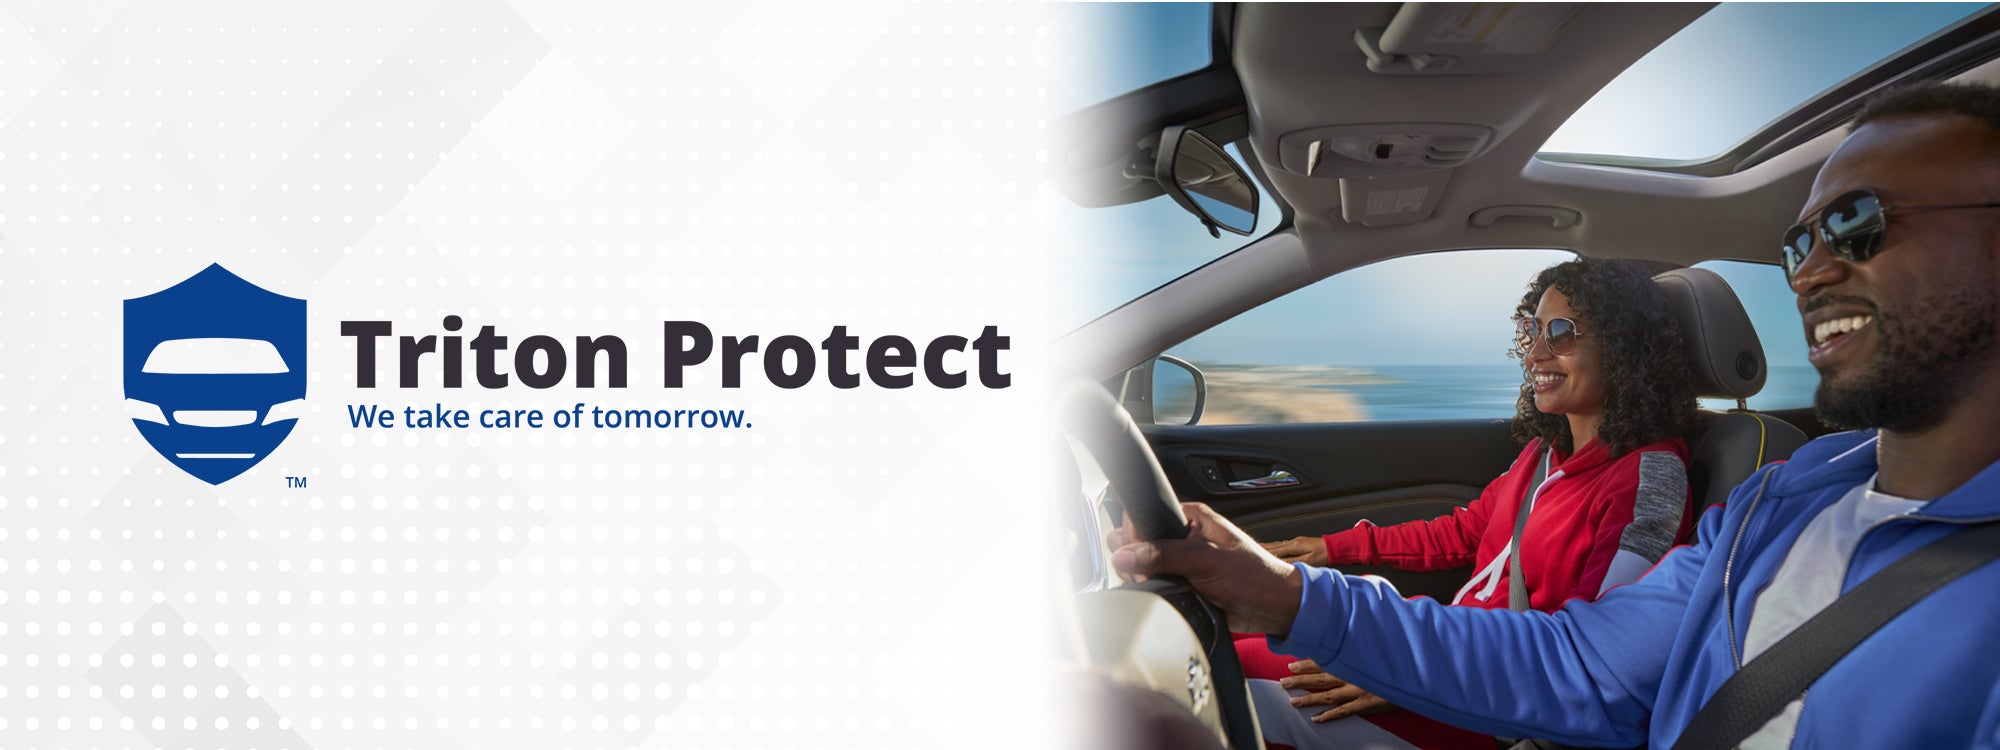 Triton Protect™ with Blake Ford